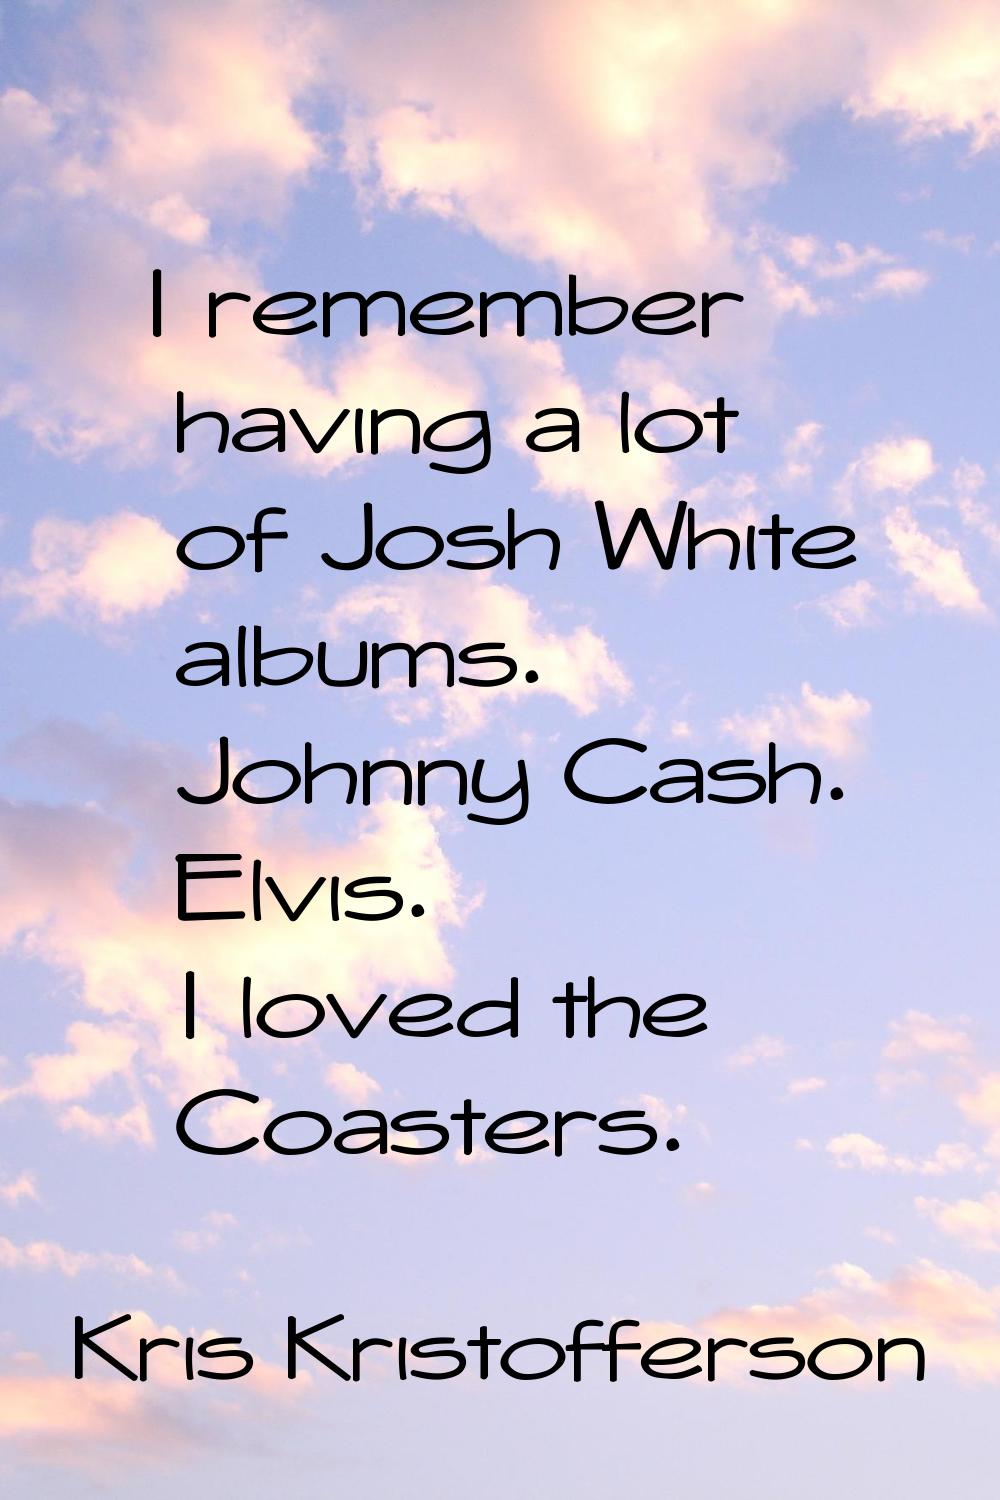 I remember having a lot of Josh White albums. Johnny Cash. Elvis. I loved the Coasters.